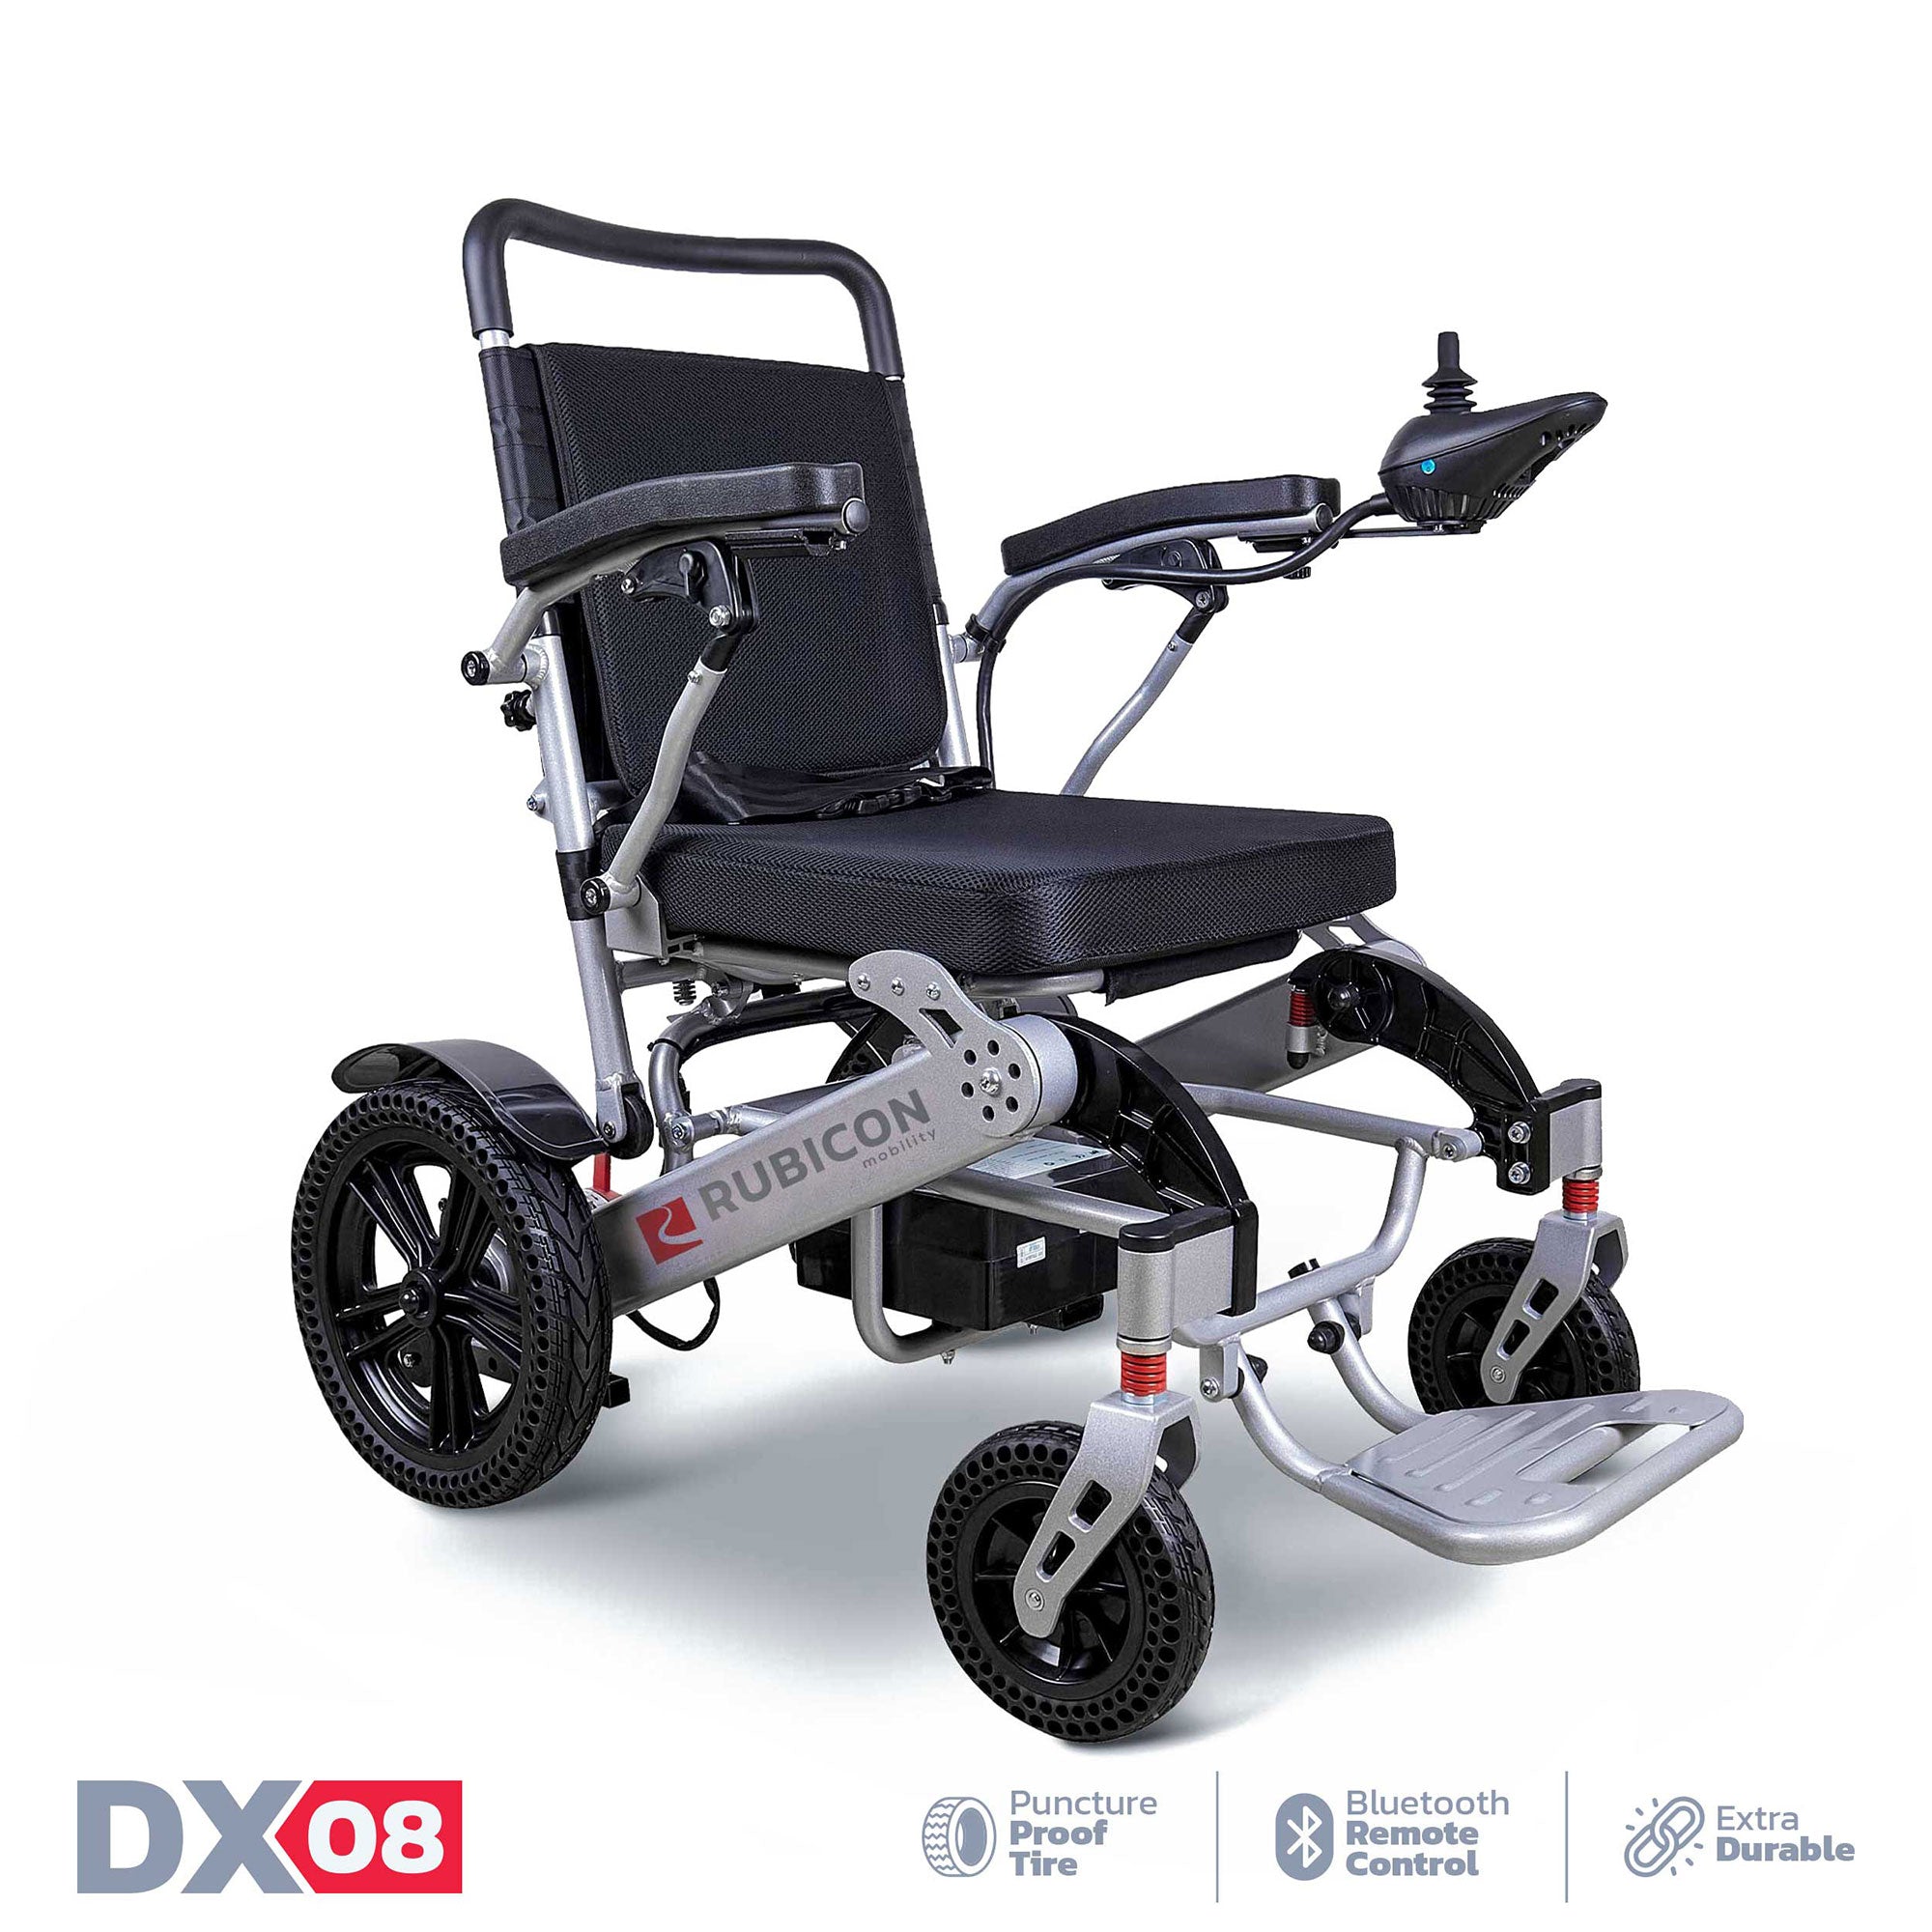 Rubicon DX08 - Extra Durable Electric Wheelchair - Electricwheelchair.Store